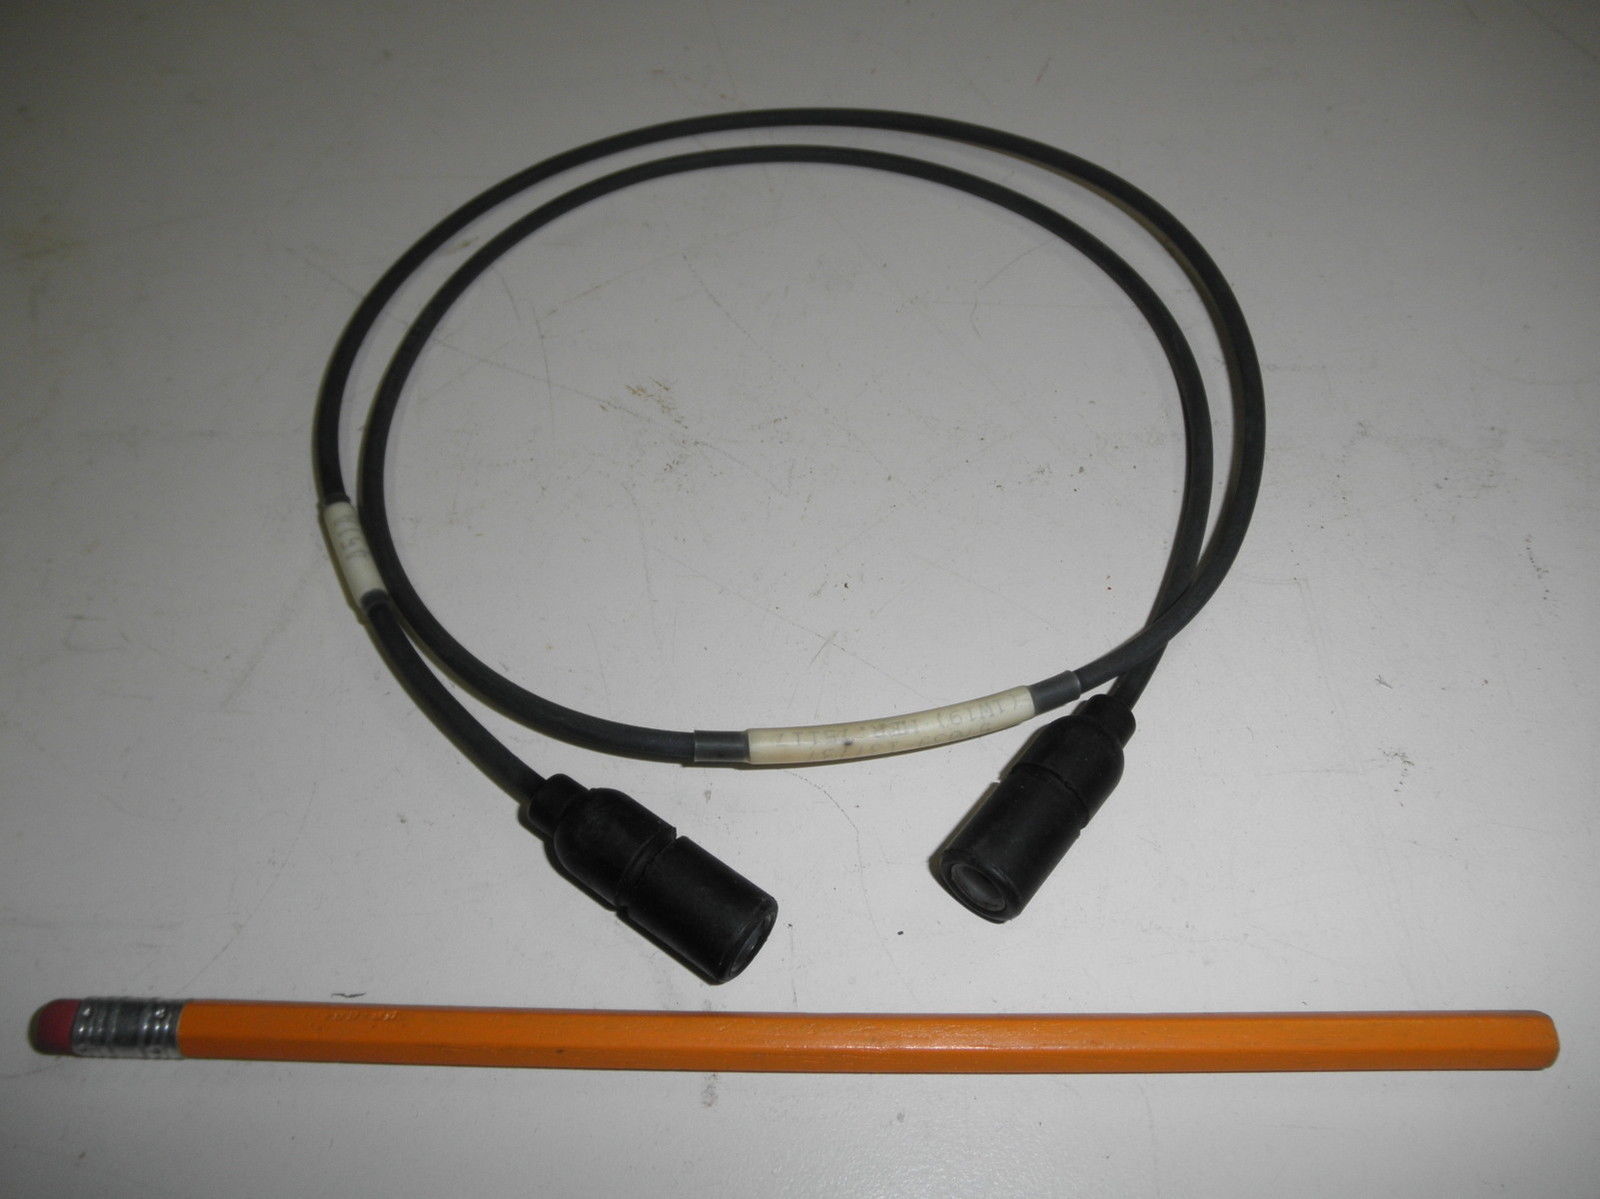 New, 6150-01-491-3808, 36" Power Cable Assembly,  M113. M113A1, M113A2, M113A3, BFVS, TACOM, 137737, Female port on both ends, 14461, R2C8